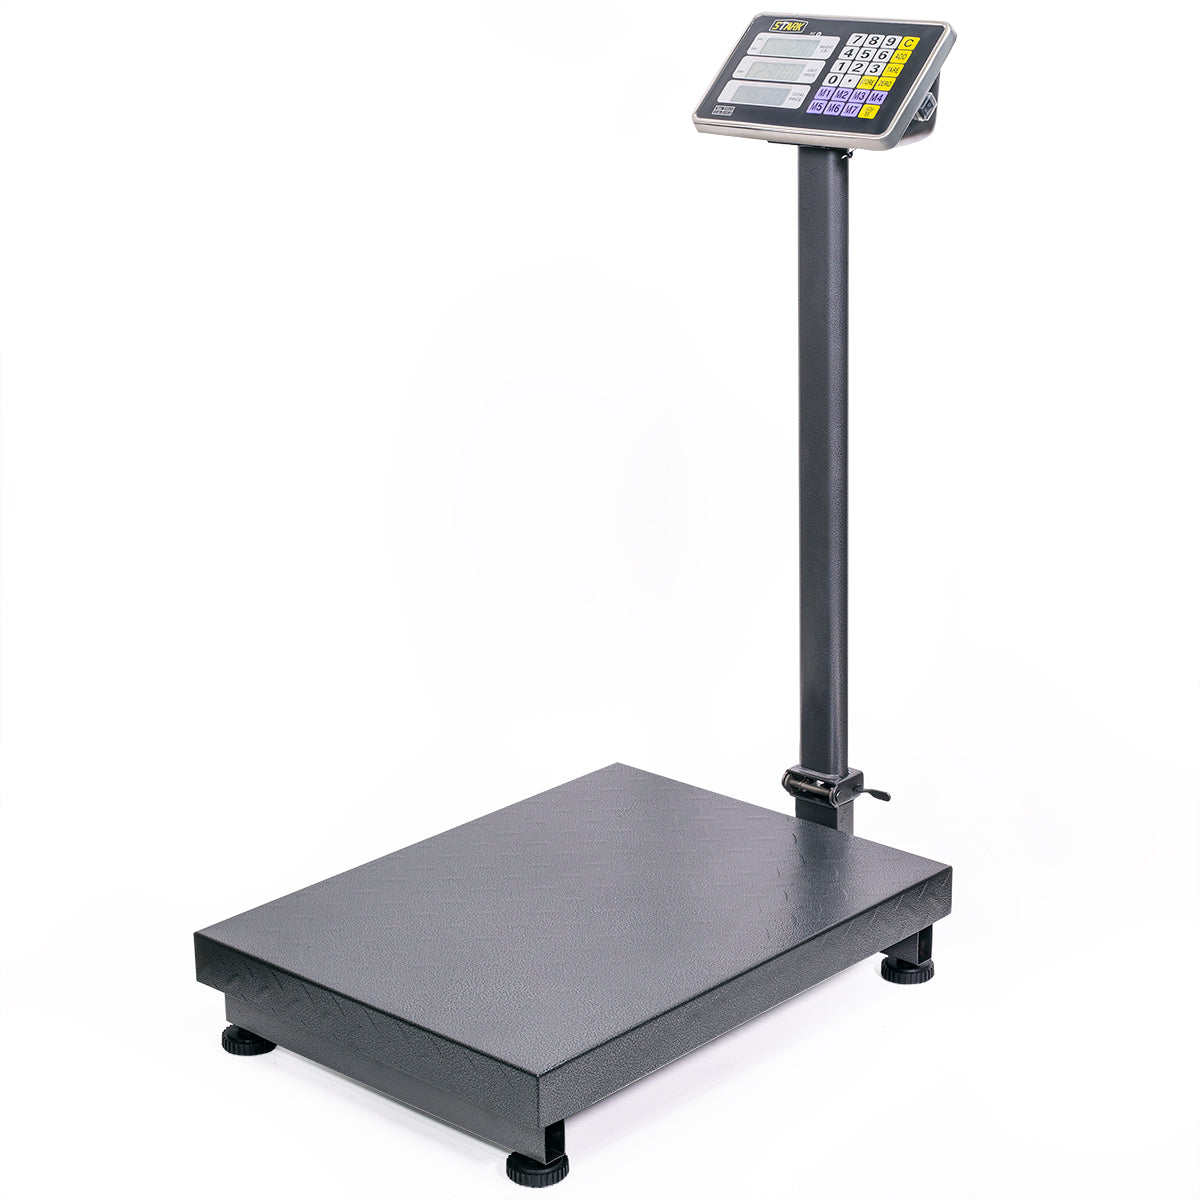 Shipping Scales, Digital Shipping Scales